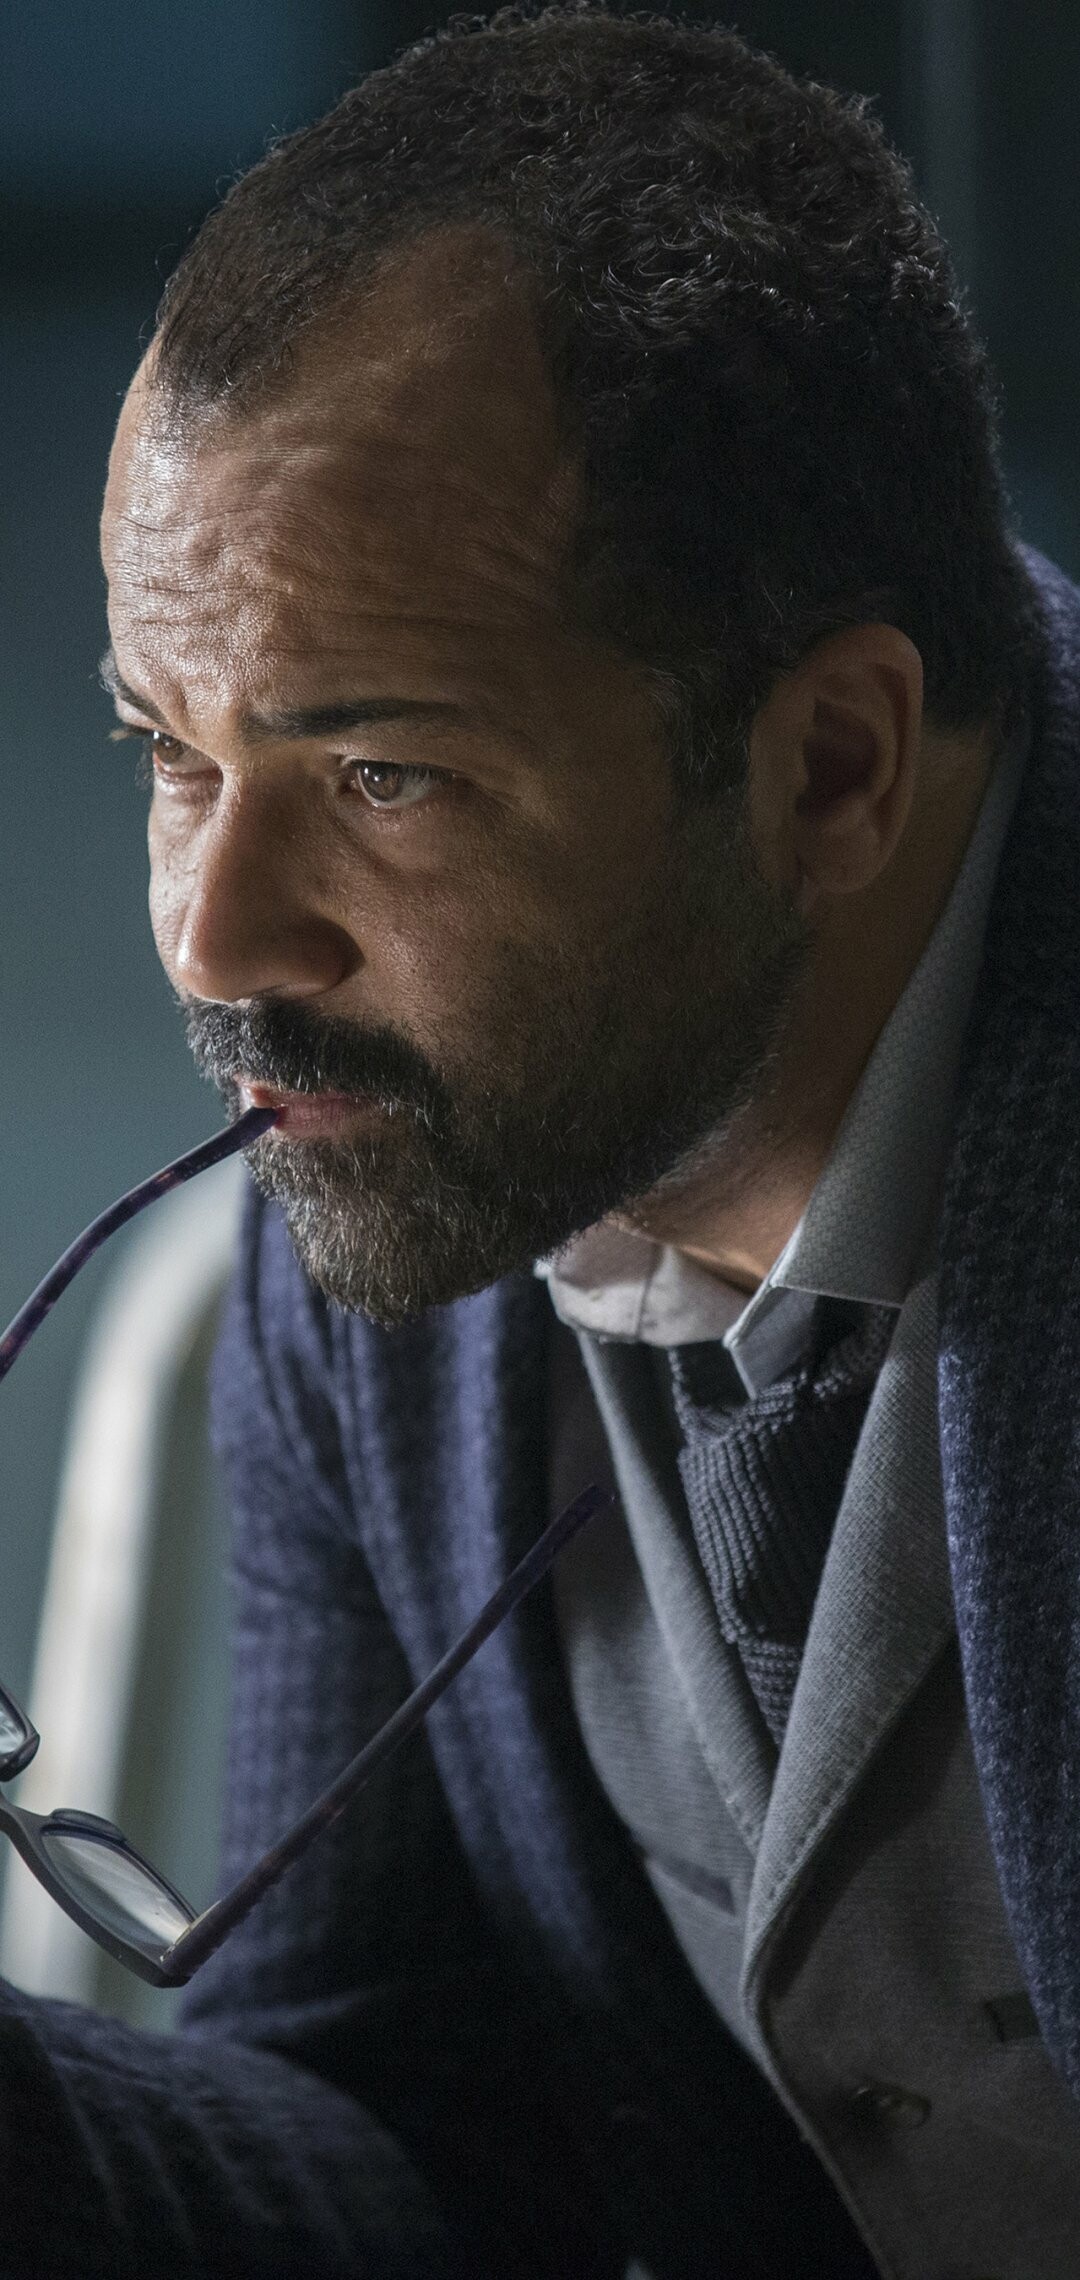 Westworld: Jeffrey Wright as Bernard Lowe, Westworld's Head of the Programming Division. 1080x2280 HD Background.